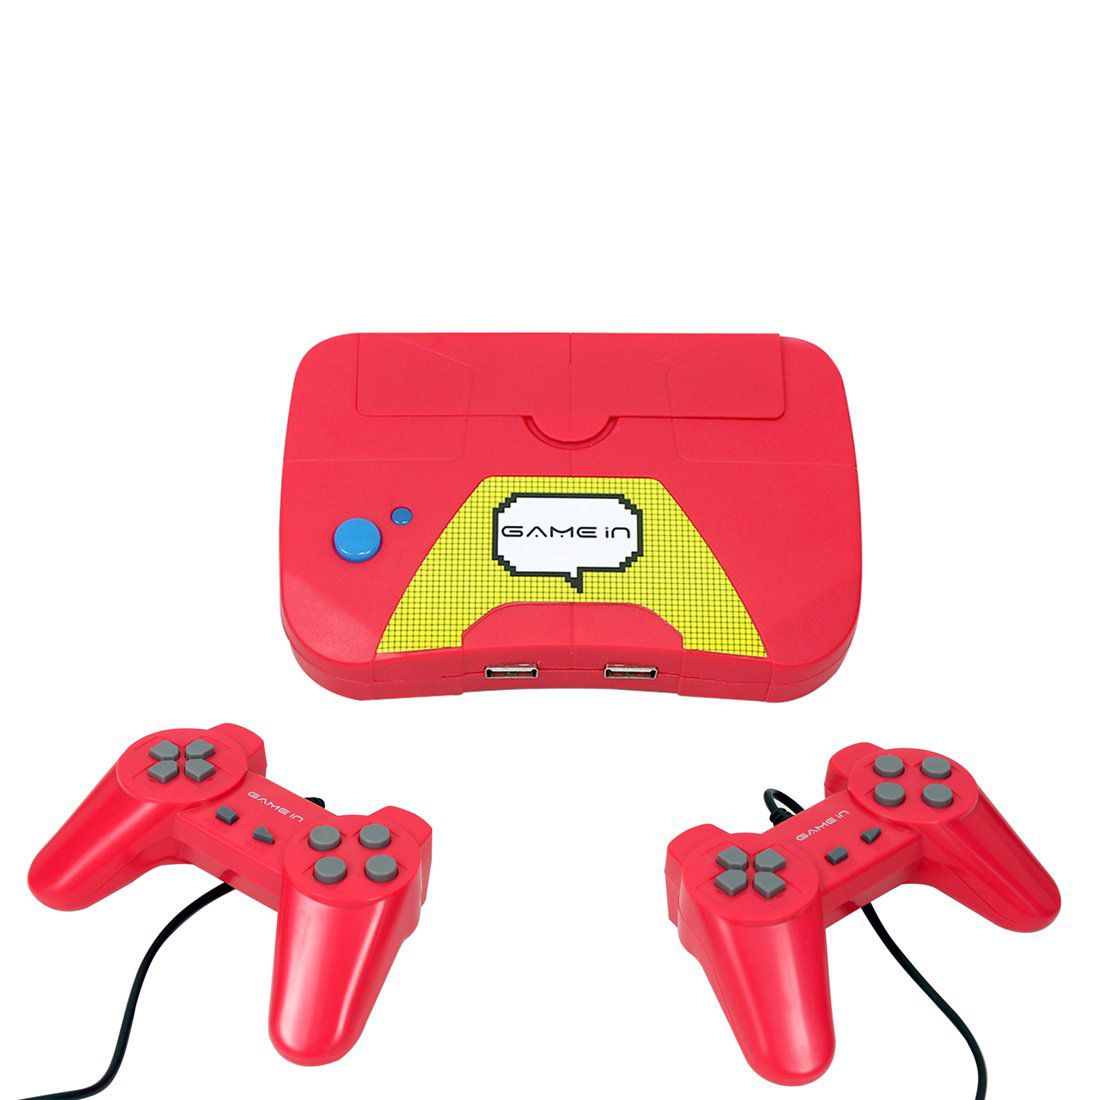     			Mitashi Game In Champ Gaming Console with In Built Games-Red